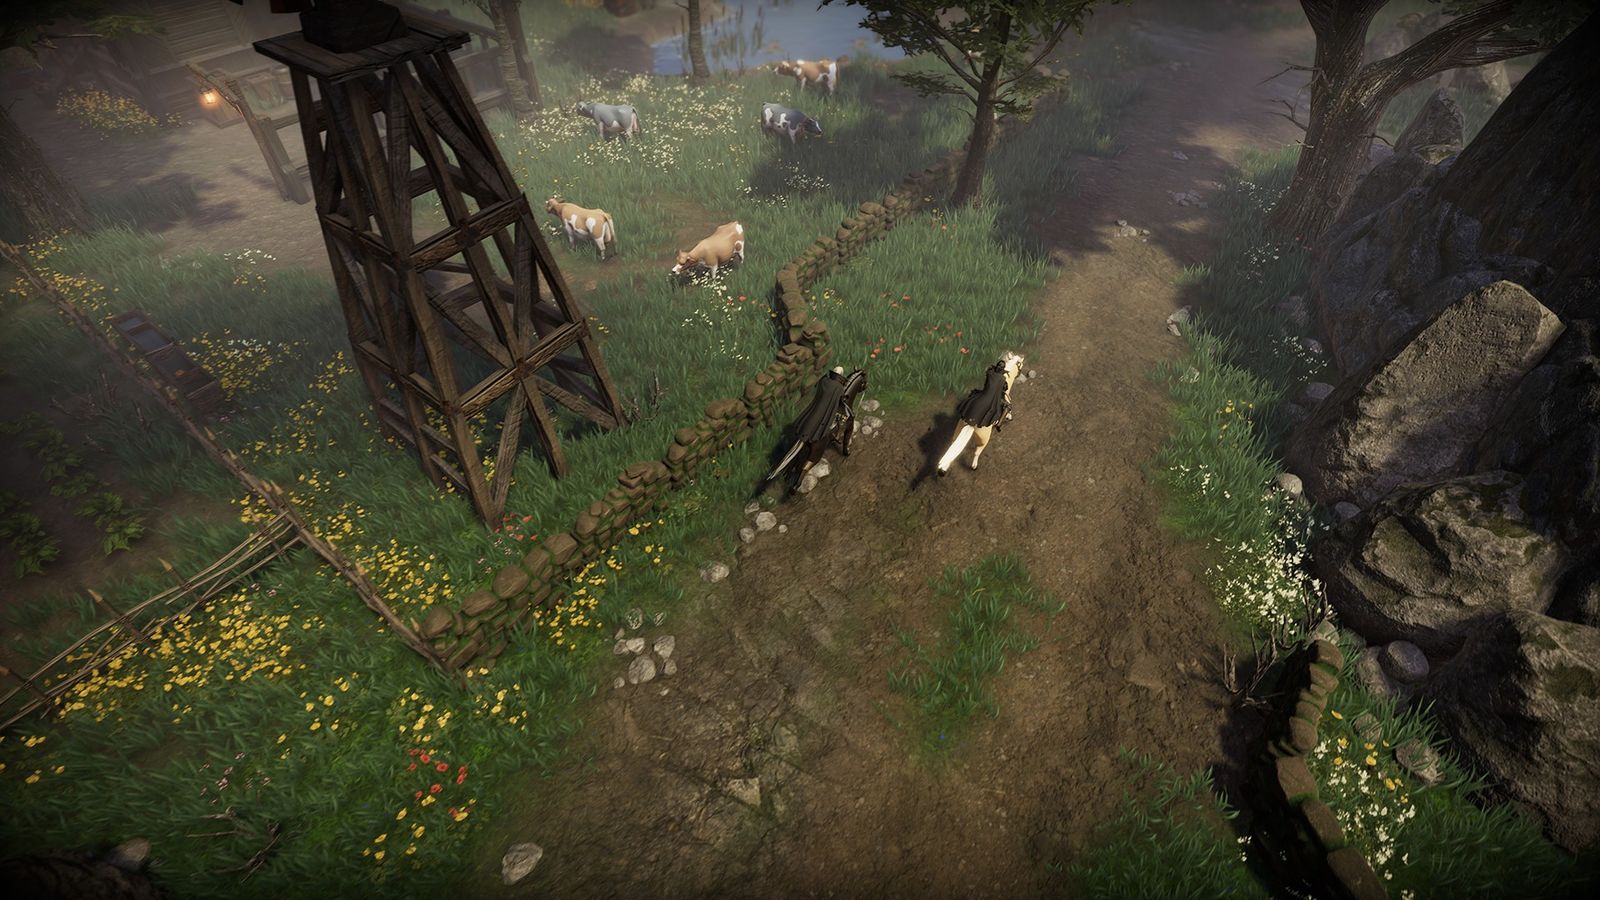 Image of the player riding through a grassy field in V Rising.